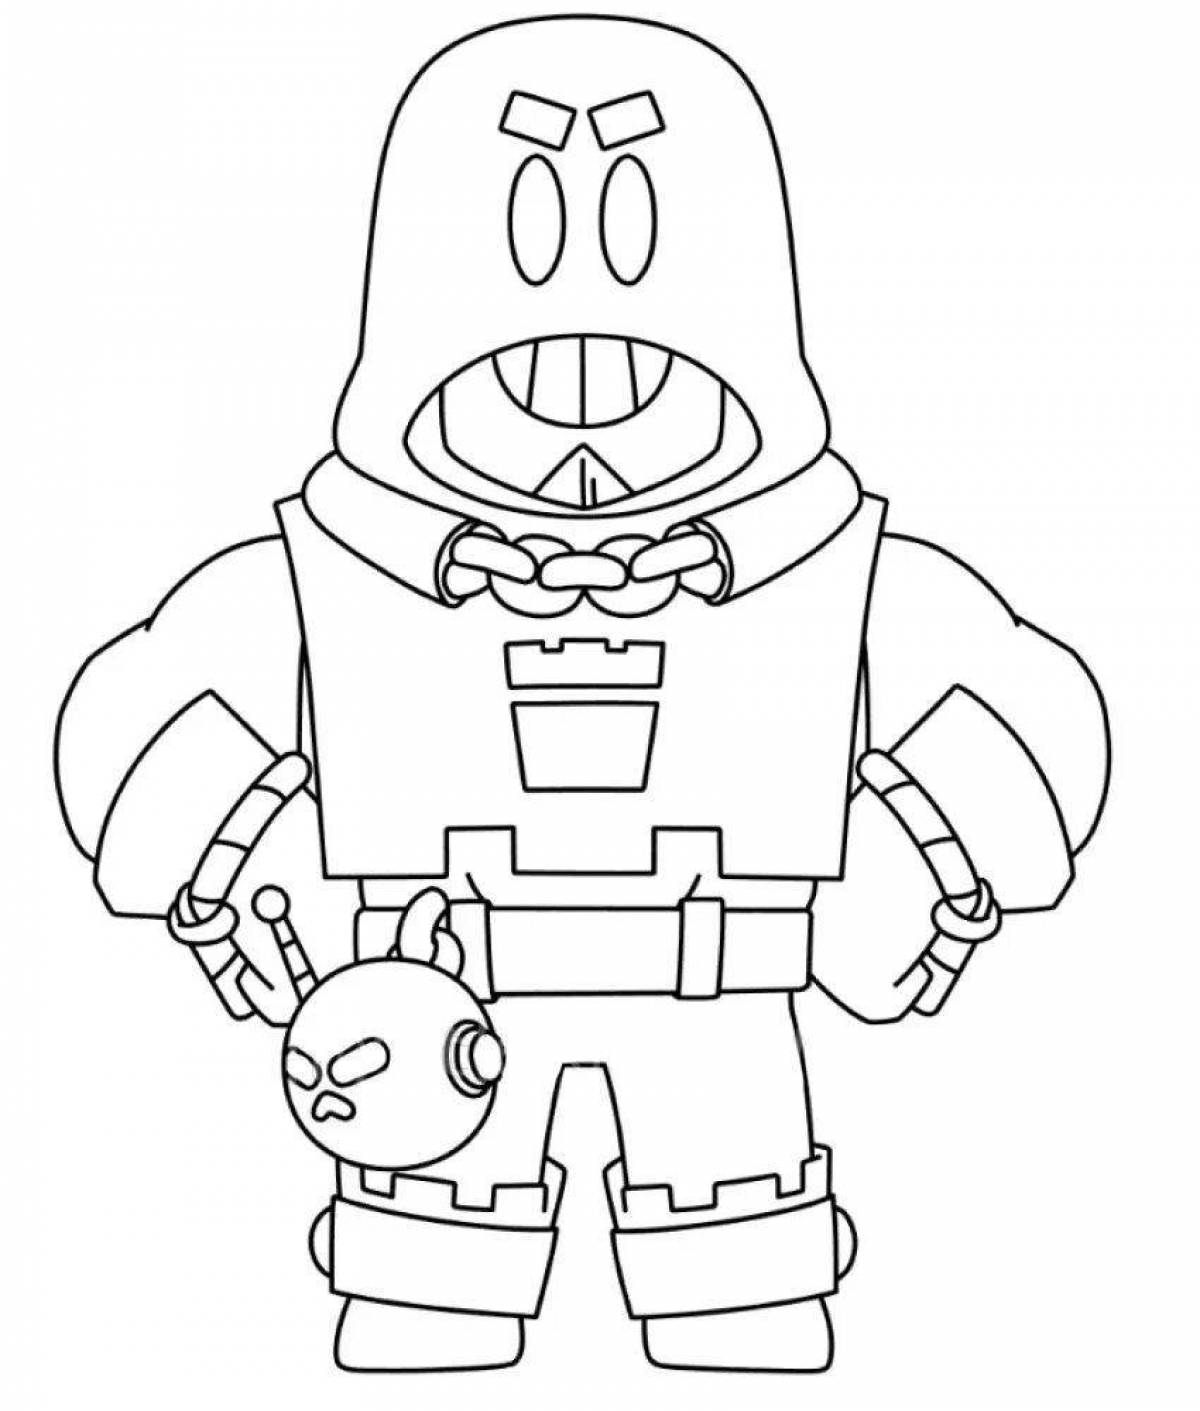 Bright browstars coloring pages